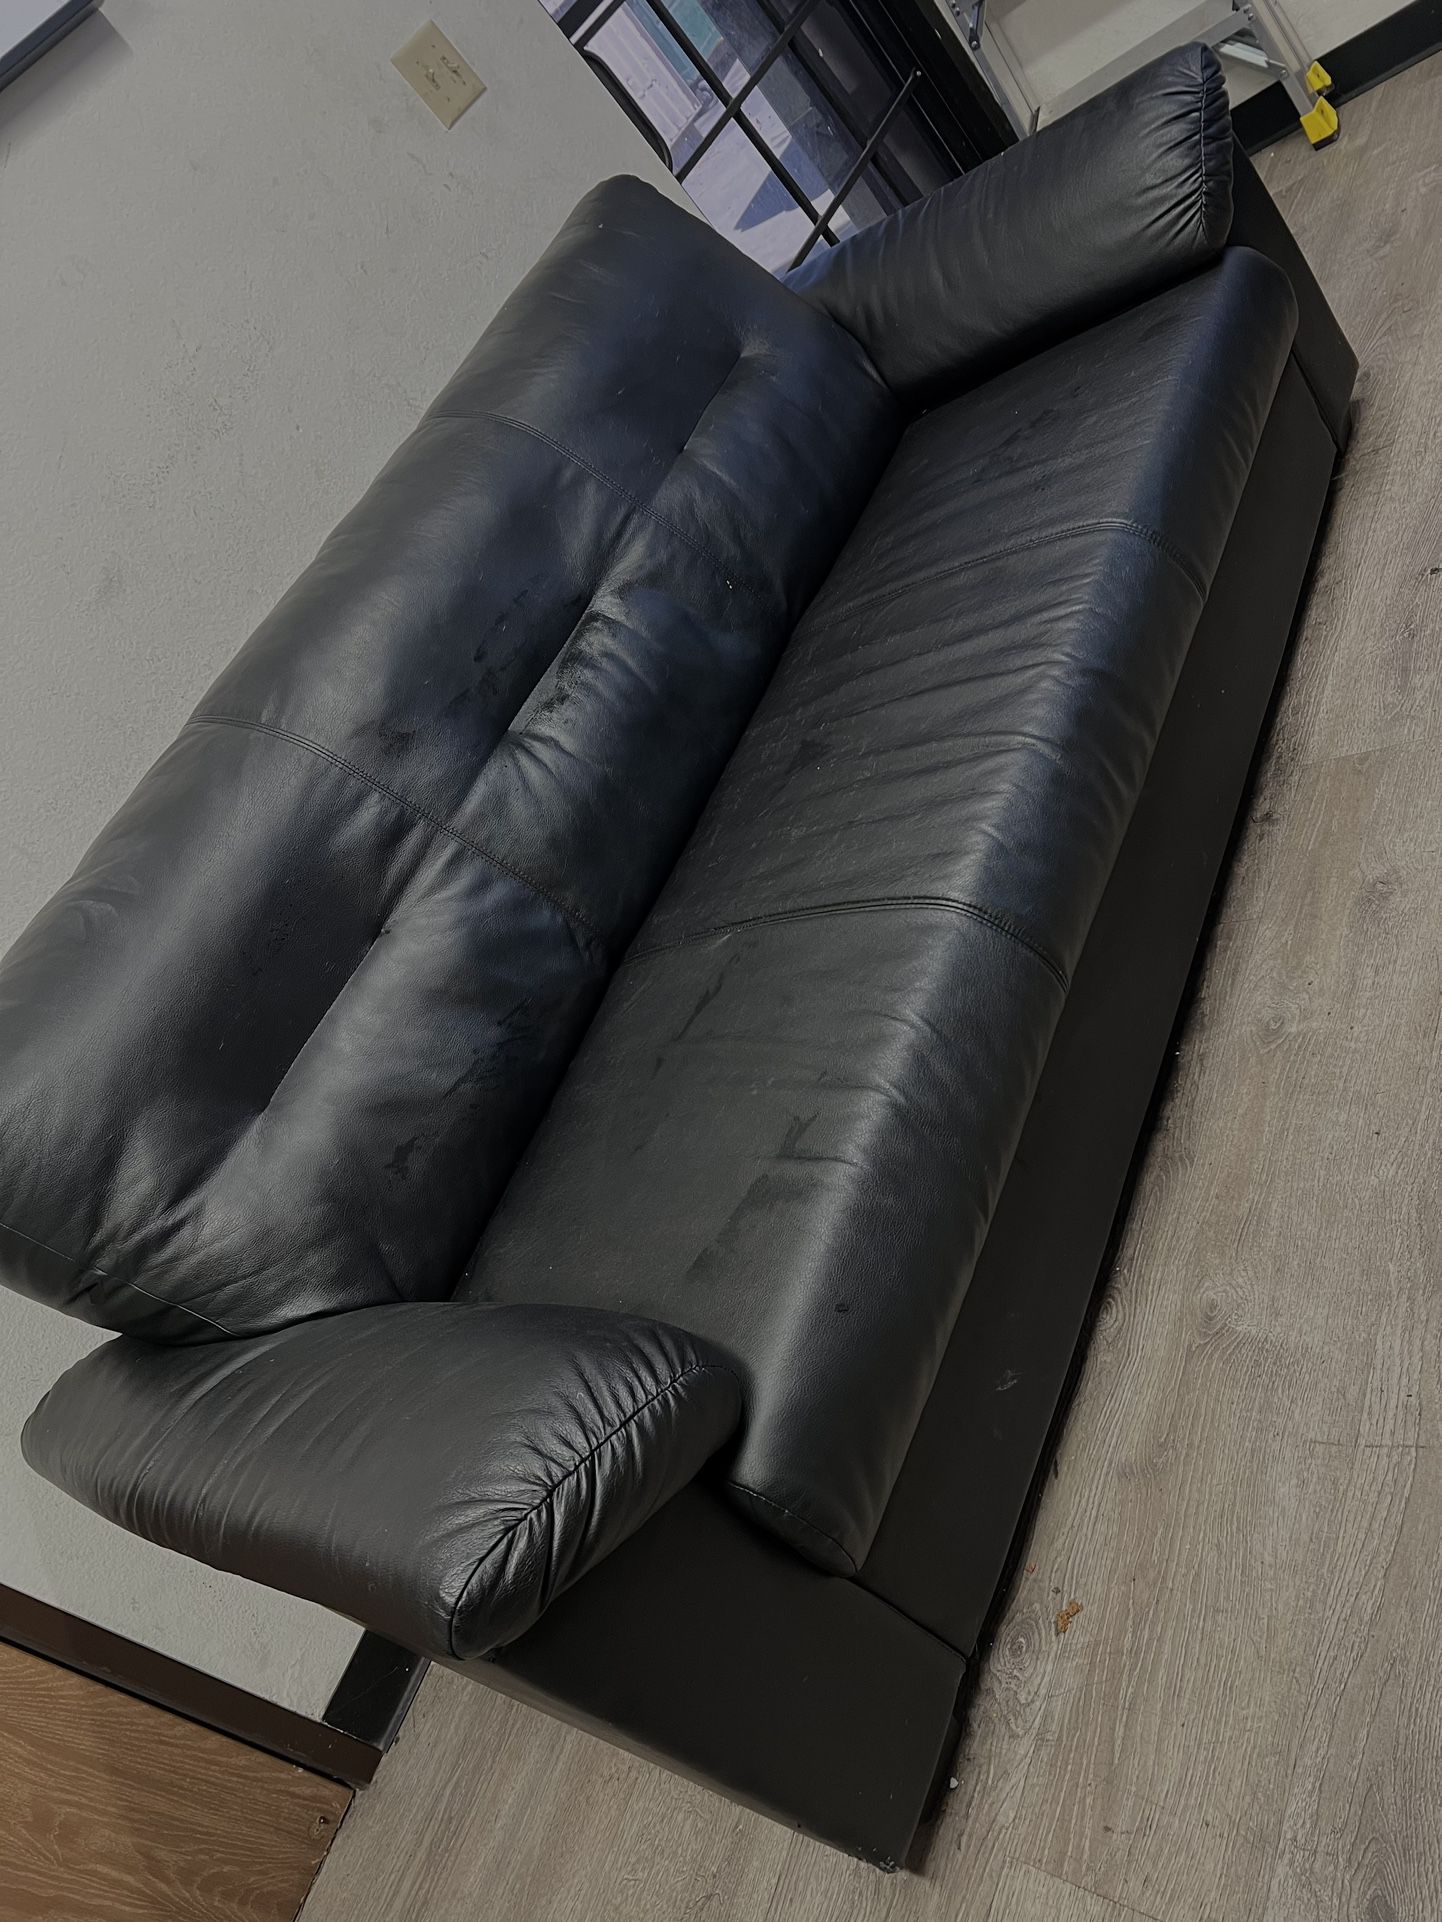 IKEA Black Leather Couch 